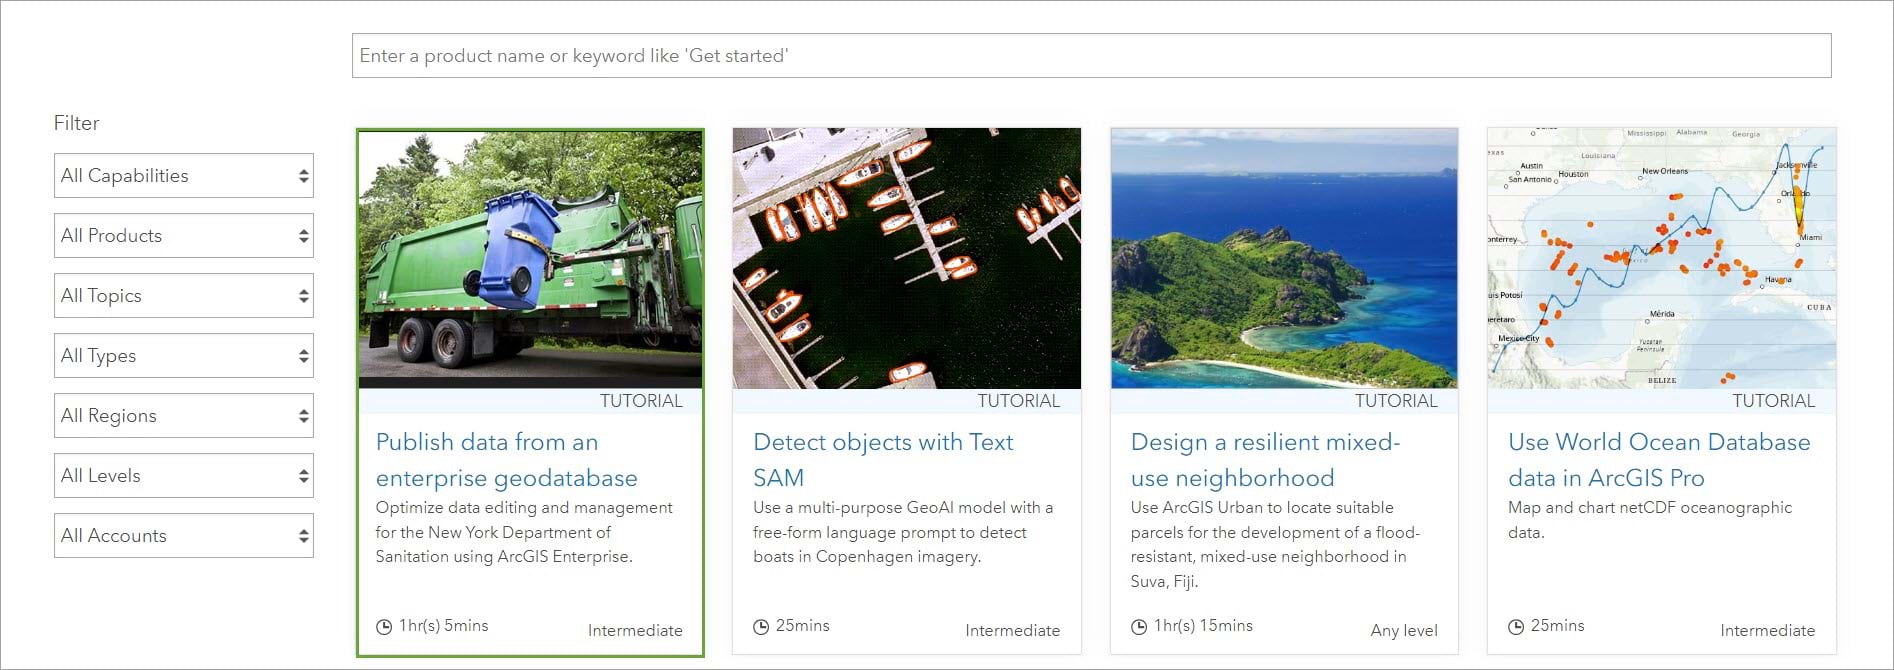 The Learn ArcGIS gallery